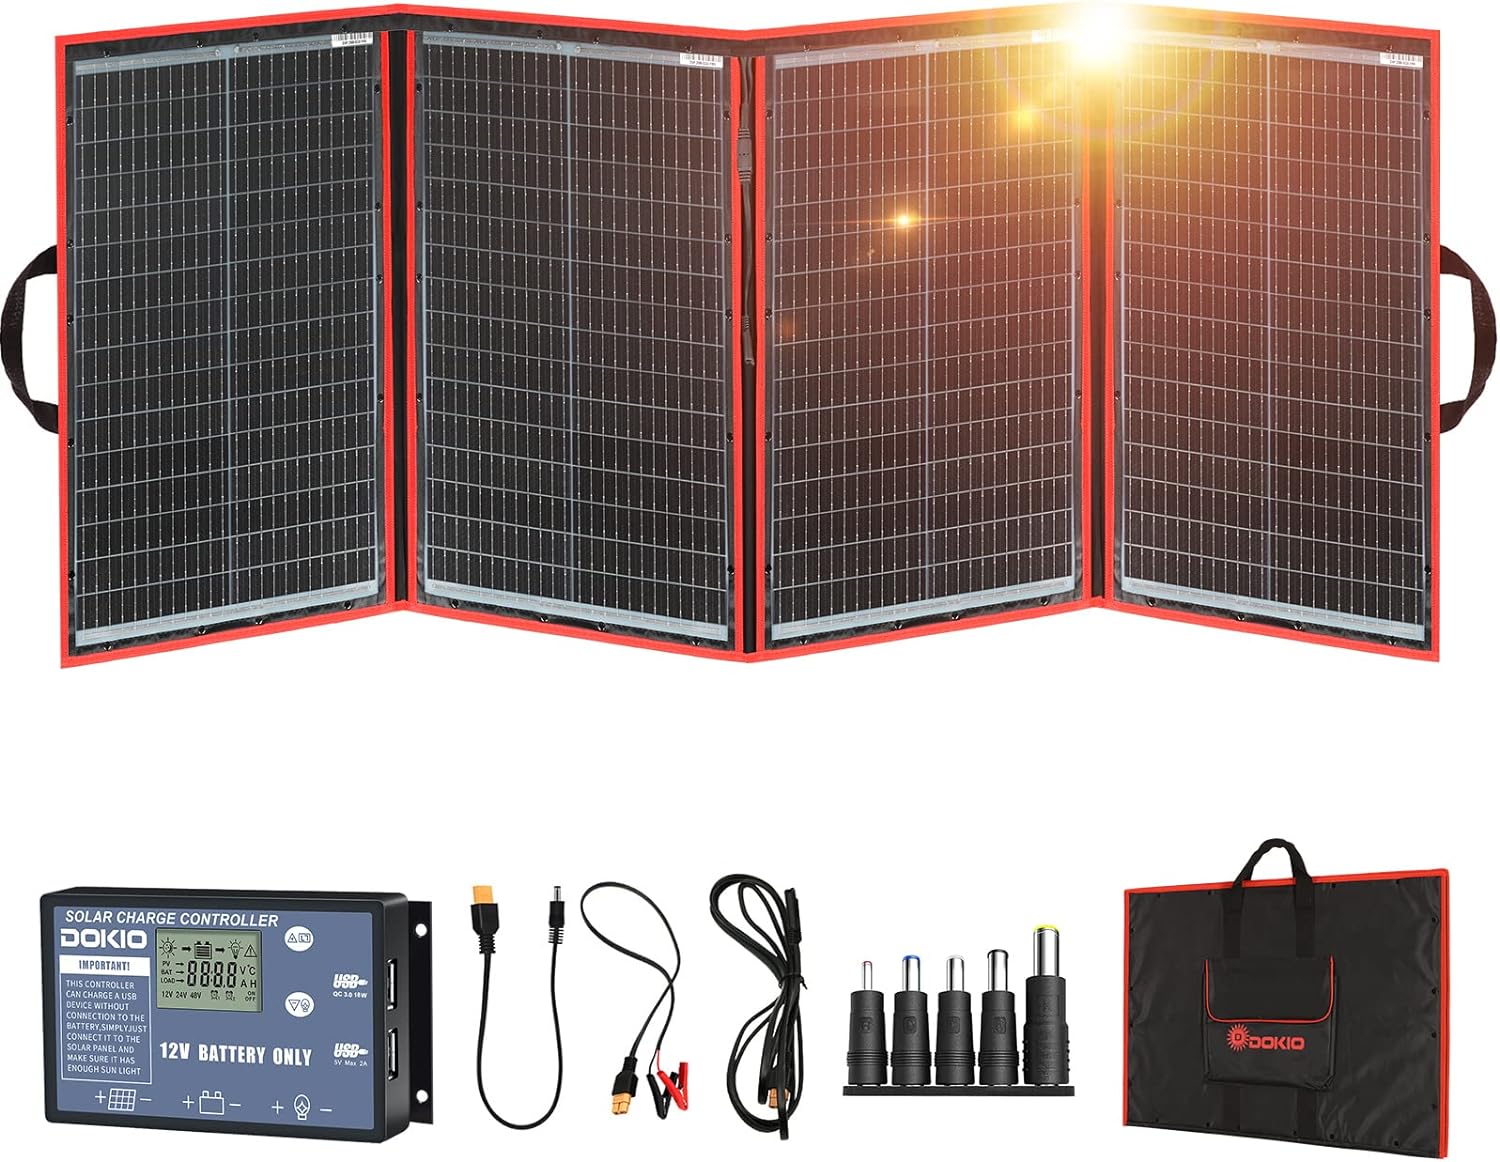 DOKIO 160W 18V Portable Solar Panel Kit (ONLY 9lb) Folding Solar Charger with 2 USB Outputs for 12v Batteries/Power Station AGM LiFePo4 RV Camping Trailer Car Marine…… - DOKIO 160W 18V Portable Solar Panel Kit Review